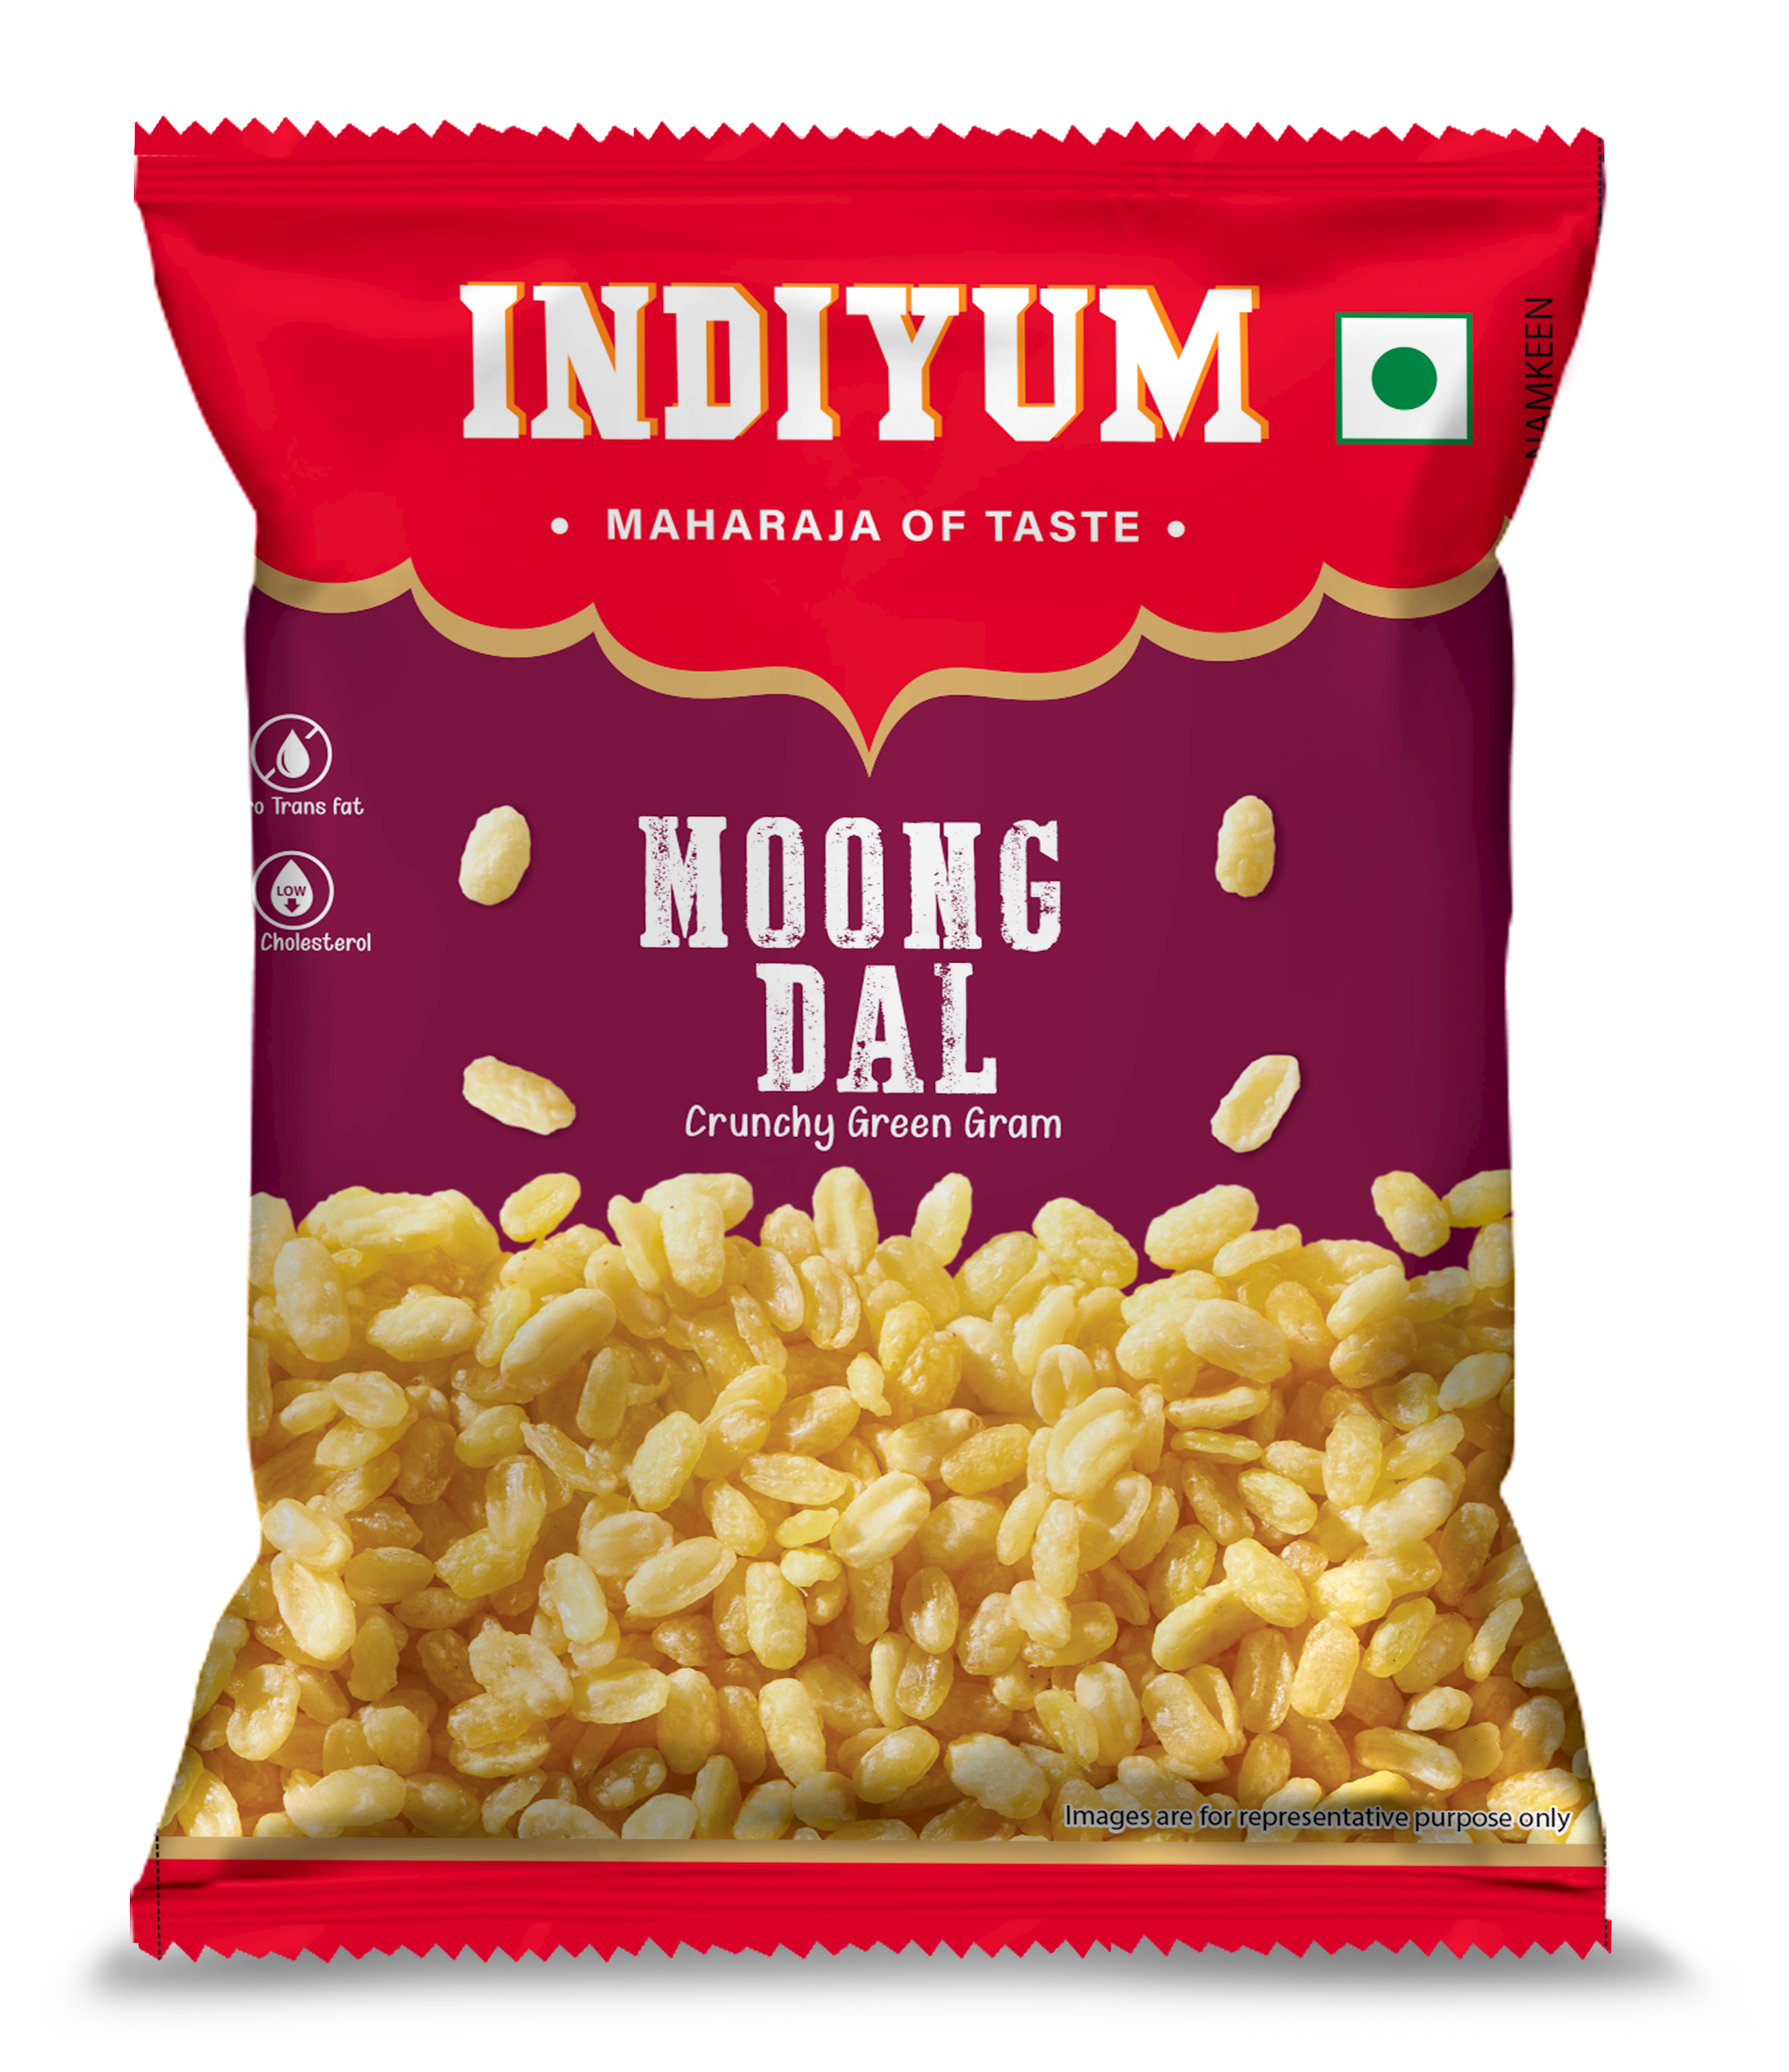 Buy Moong Dal Online at Best Prices From Indiyum